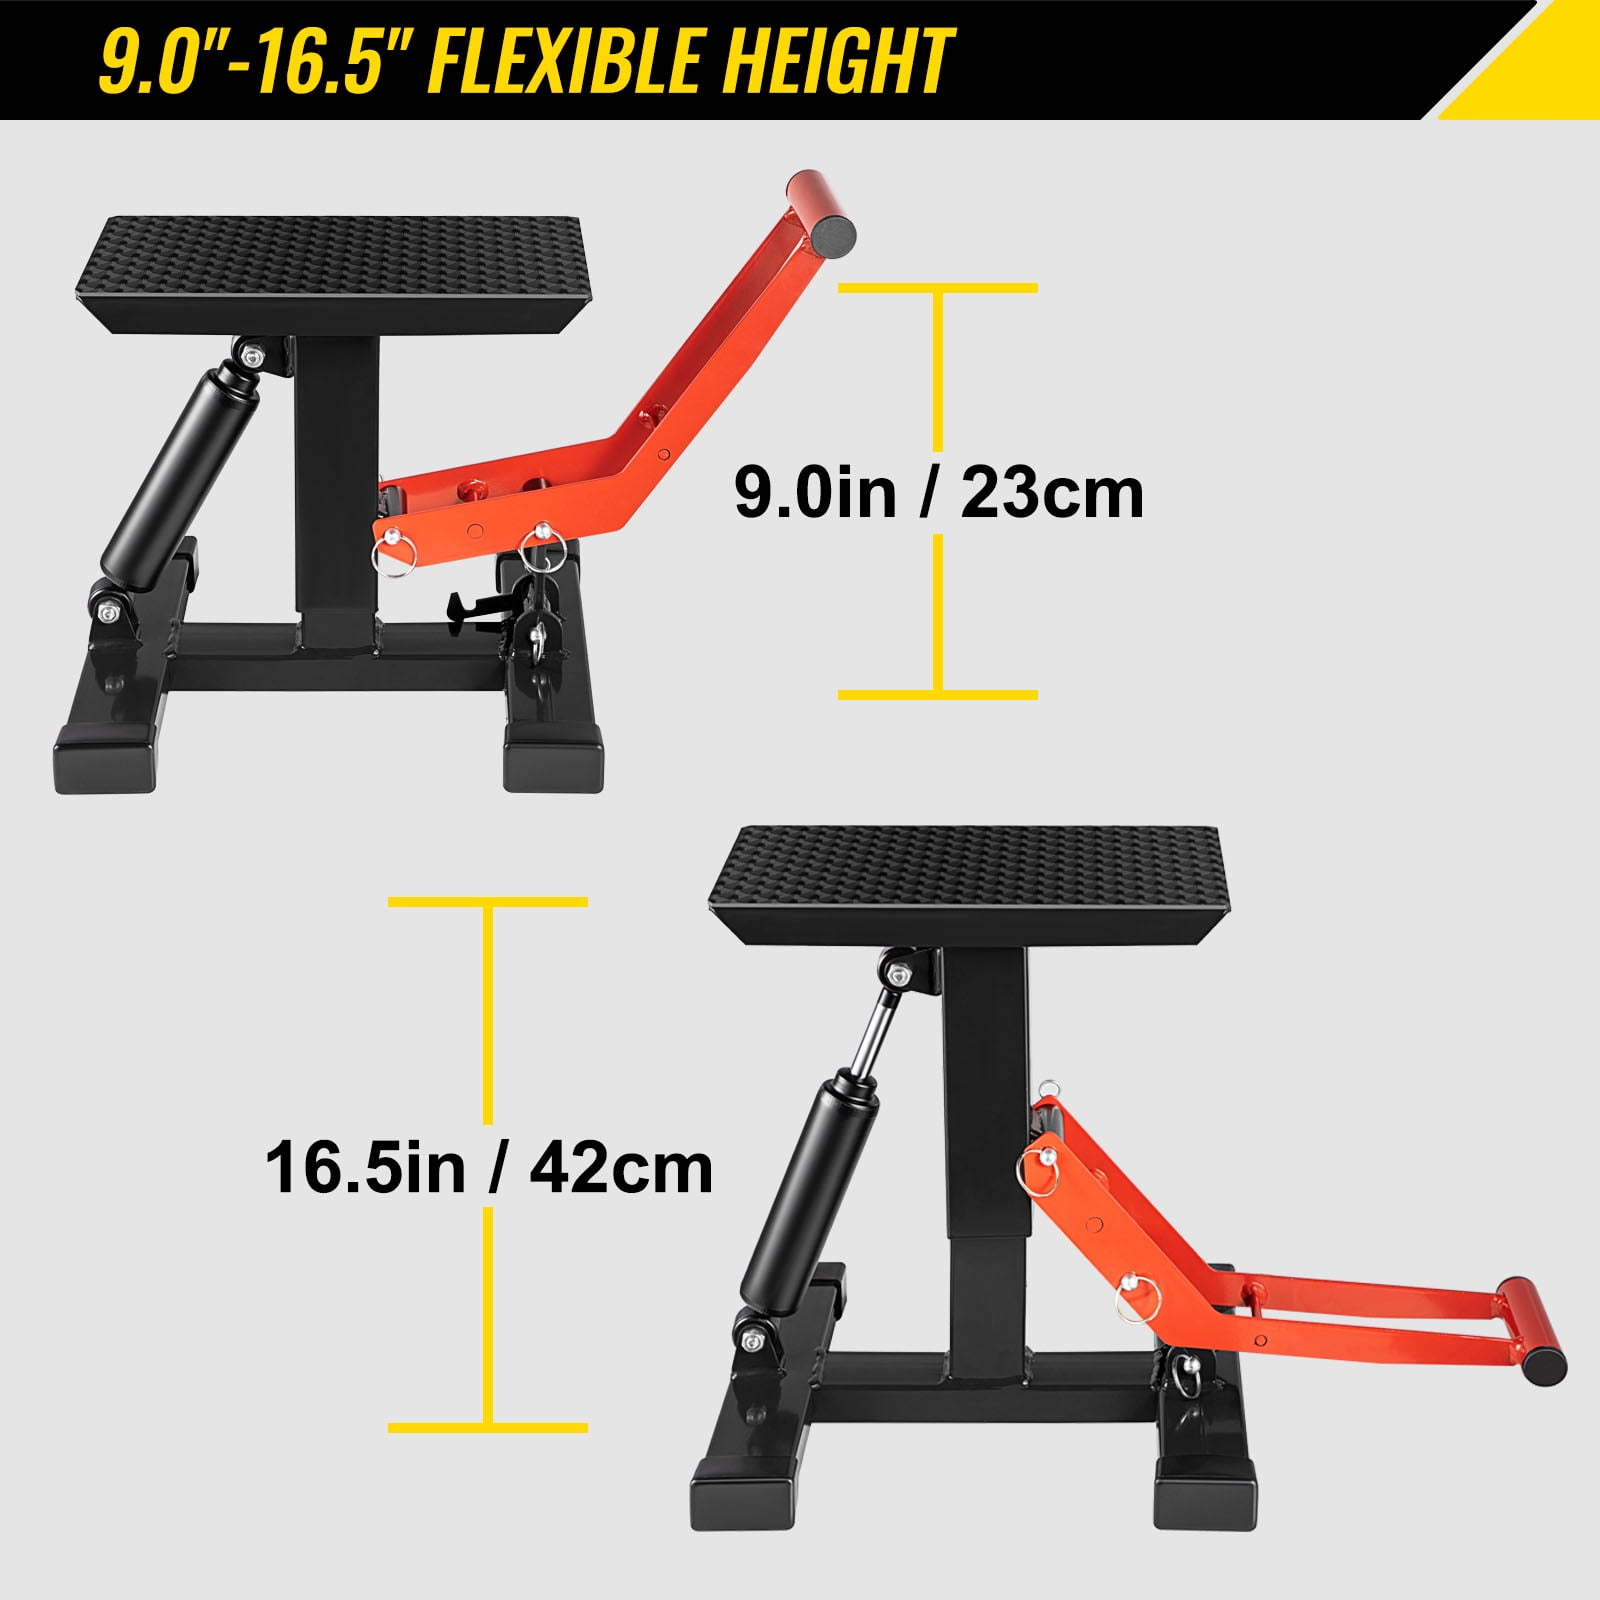 CHANGCHENG Motorcycle Dirt Bike Stand Jack Lift Table Height Adjustable  Heavy Duty Repair Hoist Rack Lifting 今だけ半額